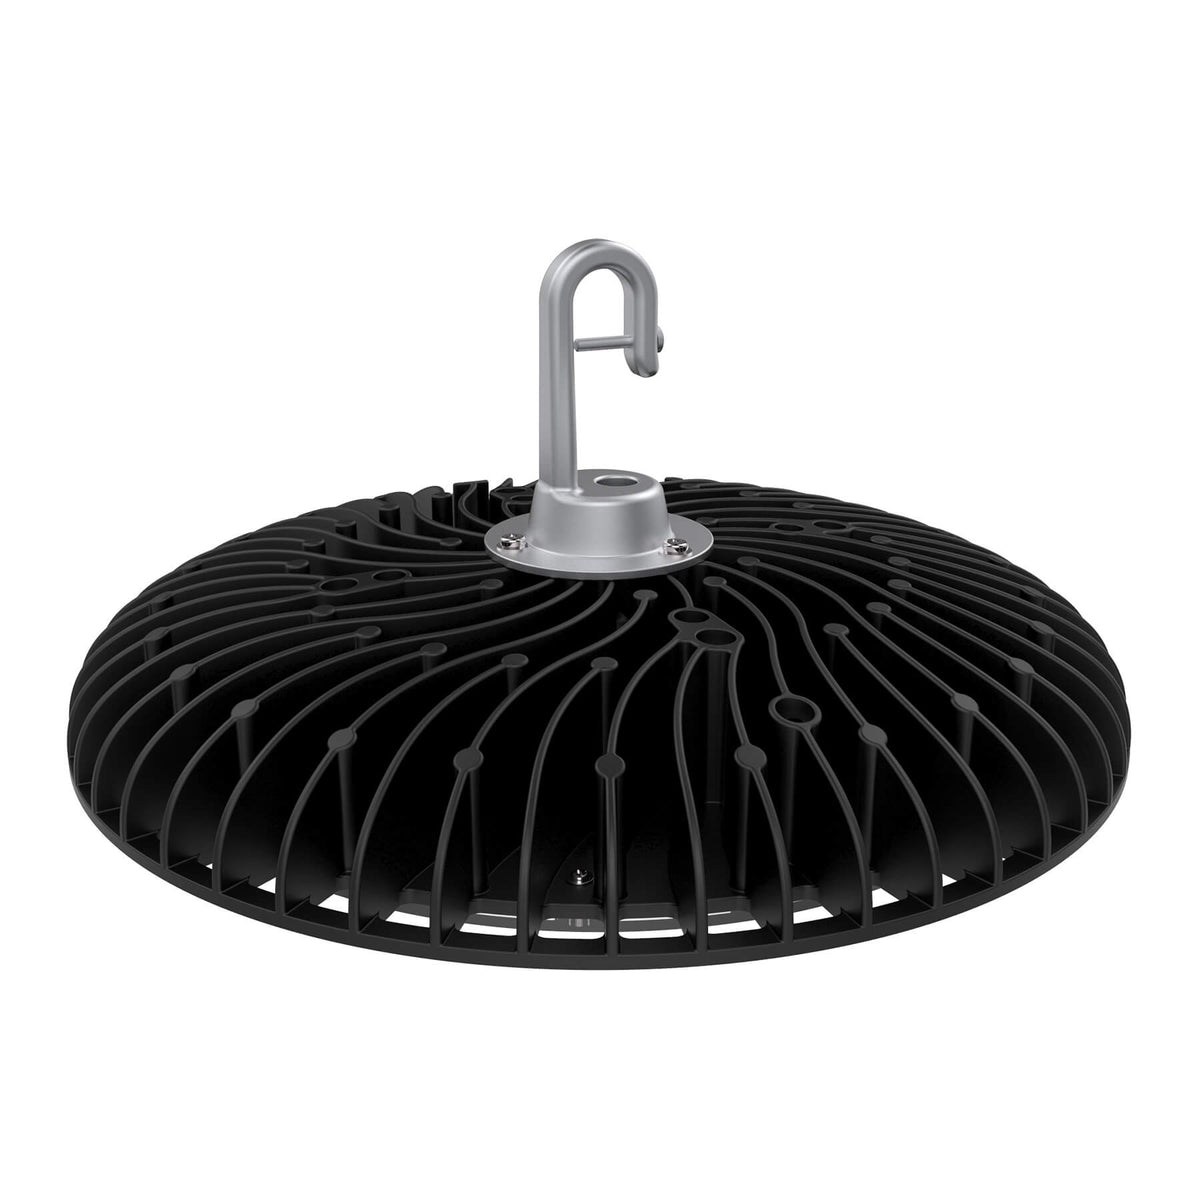 200W LED High Bay Light Fitting, Top View